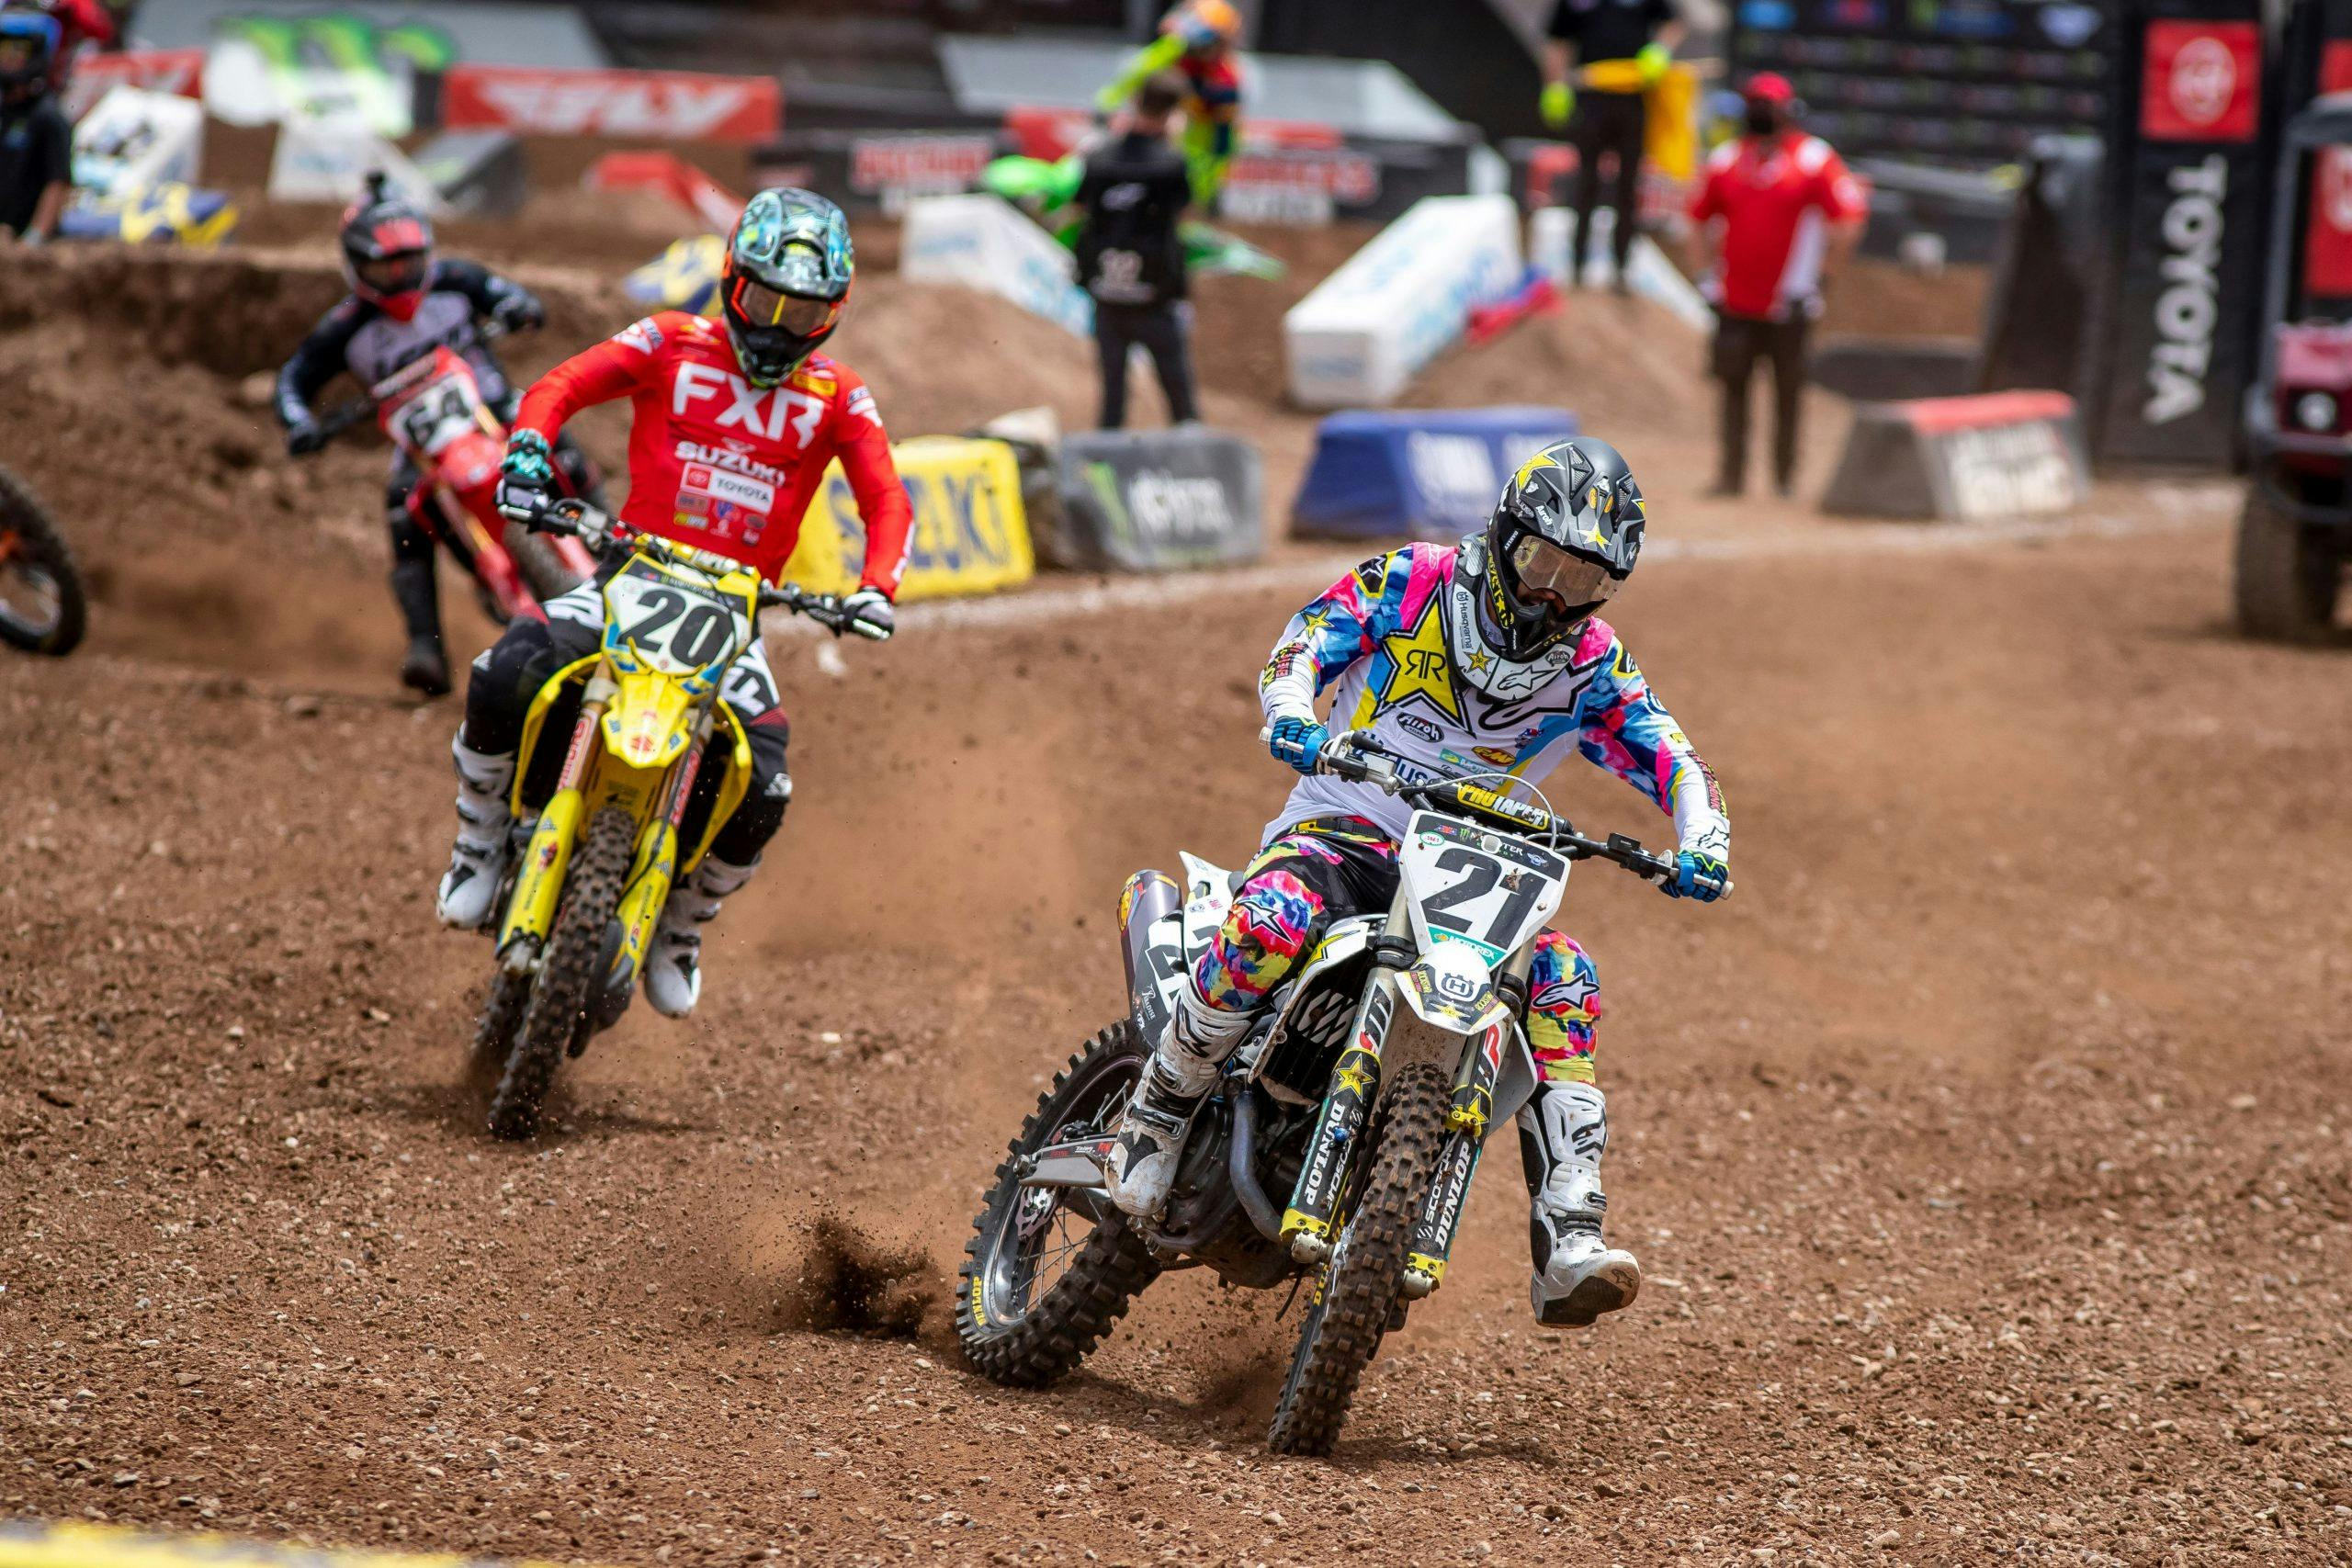 Supercross riders skidding on track action